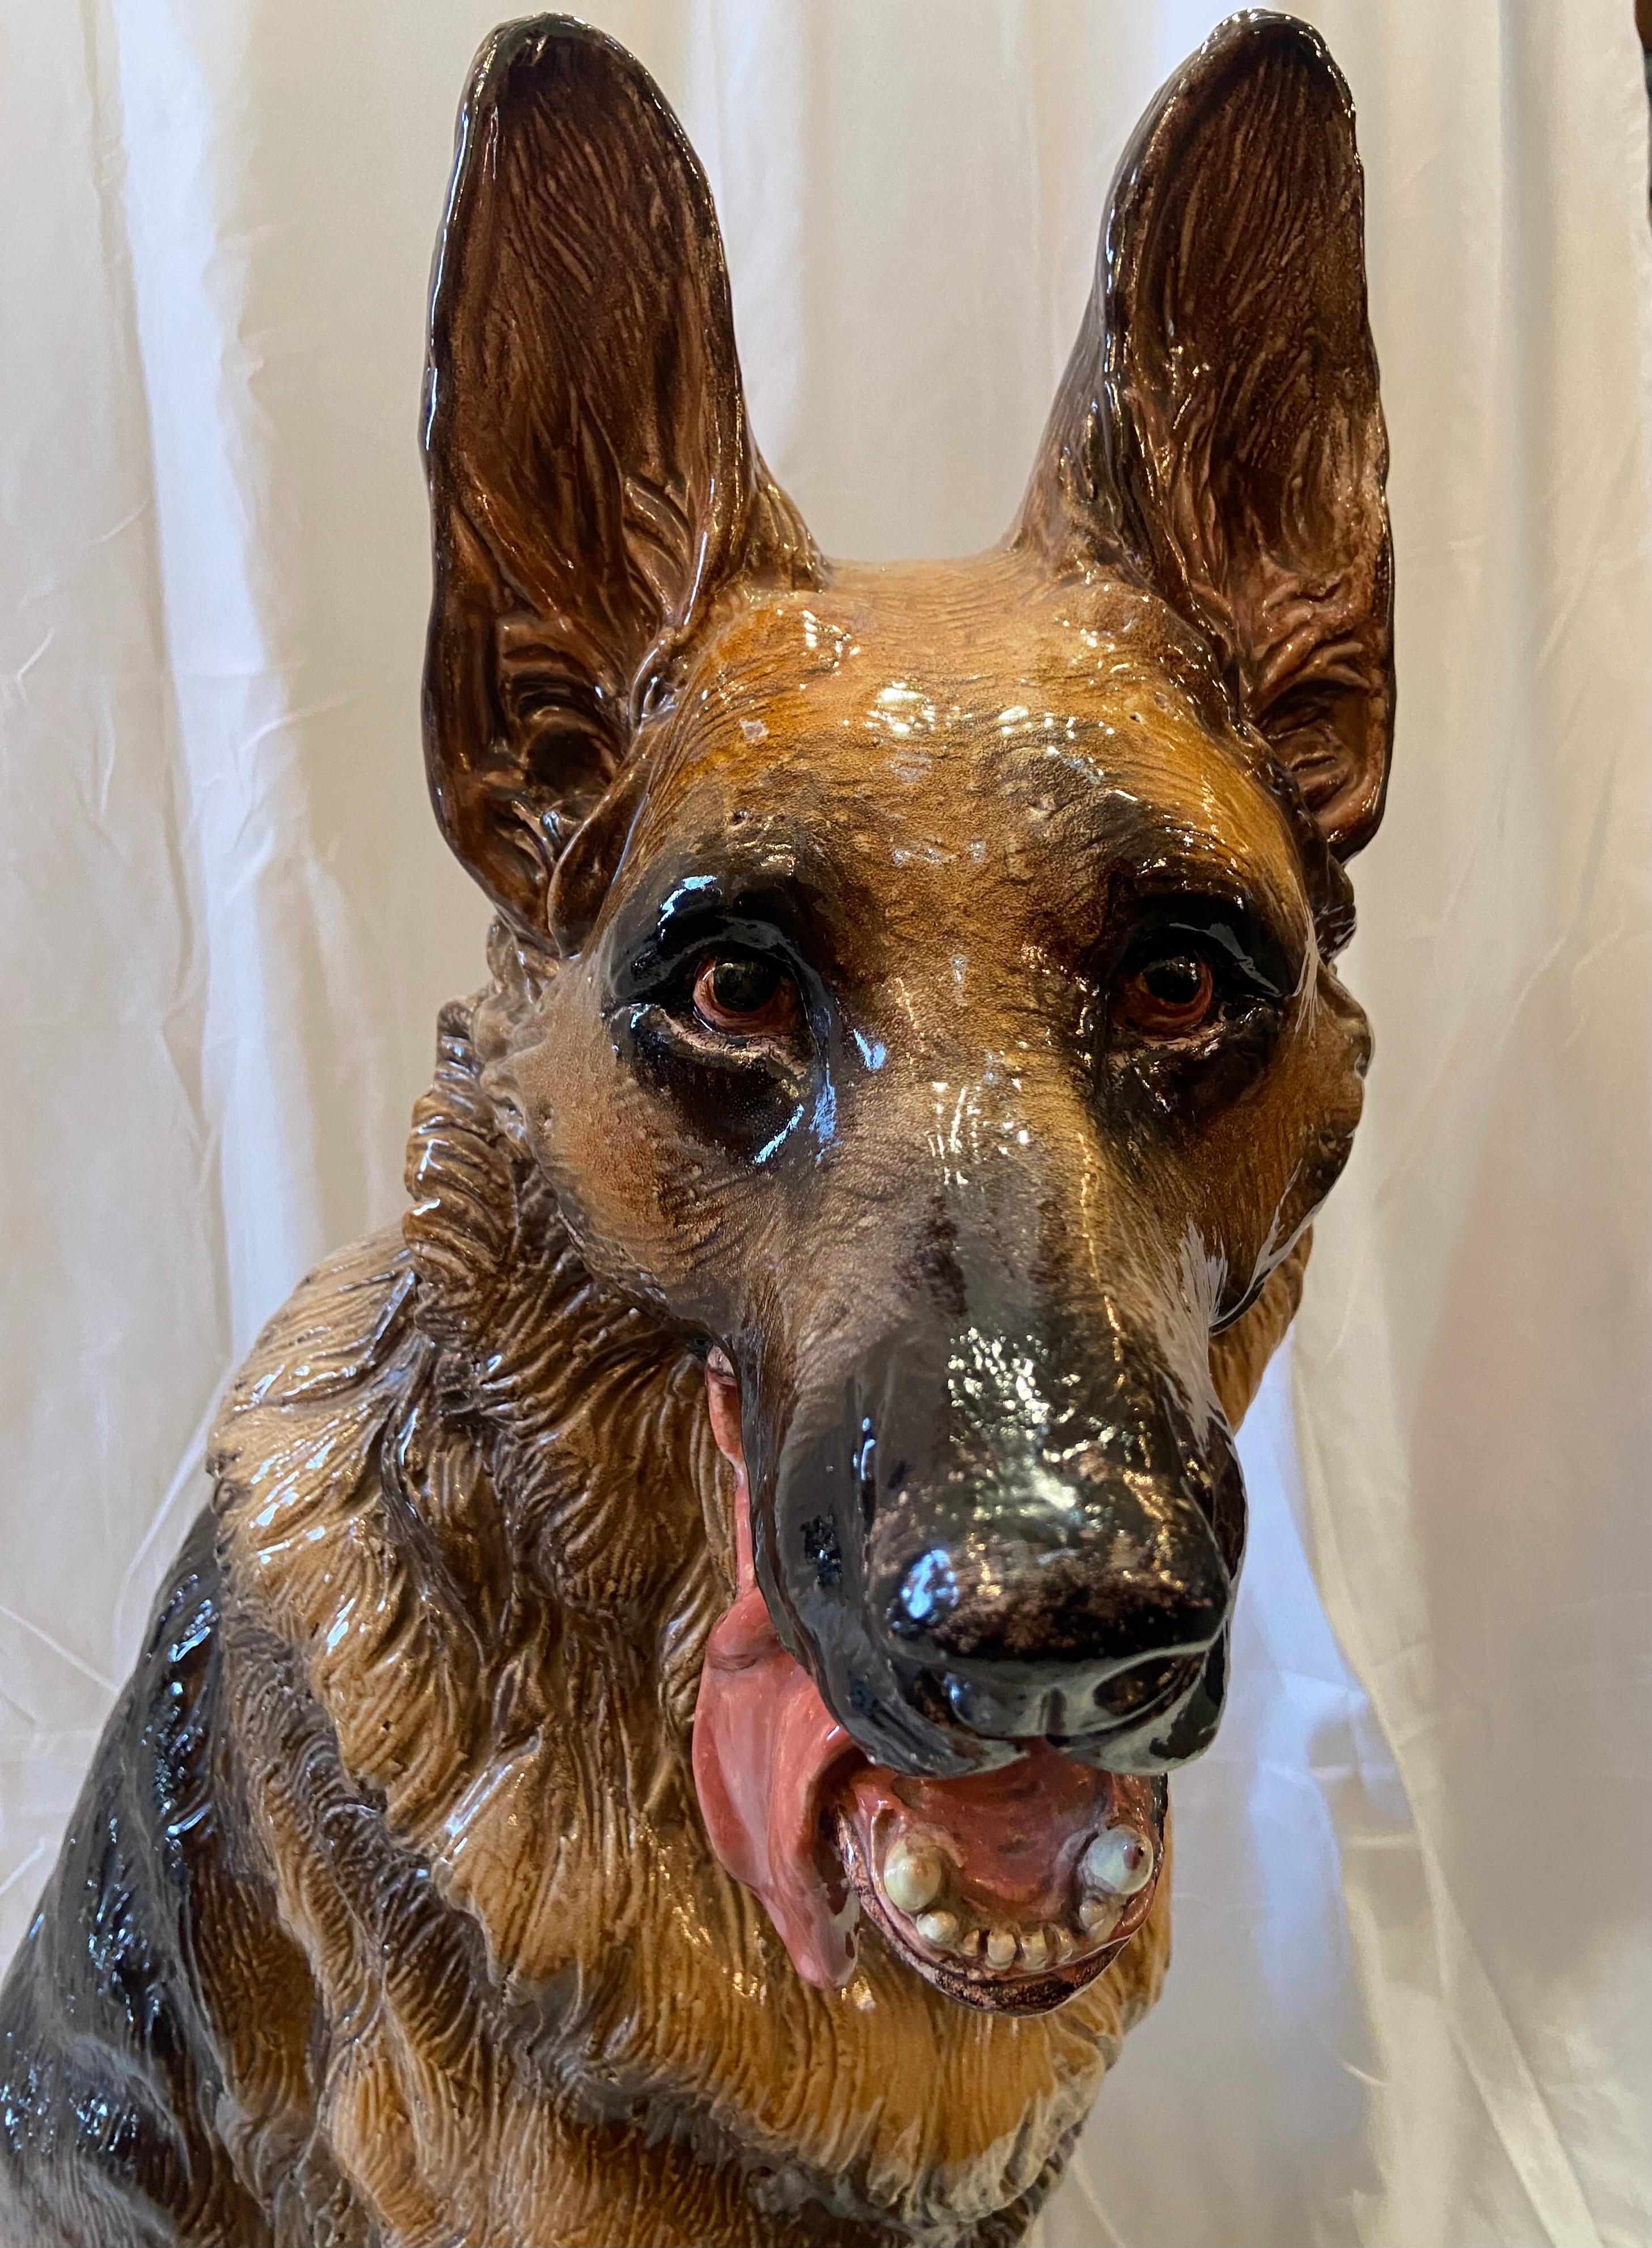 Estate Hand-Painted Terracotta German Shepherd Statue, Circa 1900-1920 For  Sale at 1stDibs